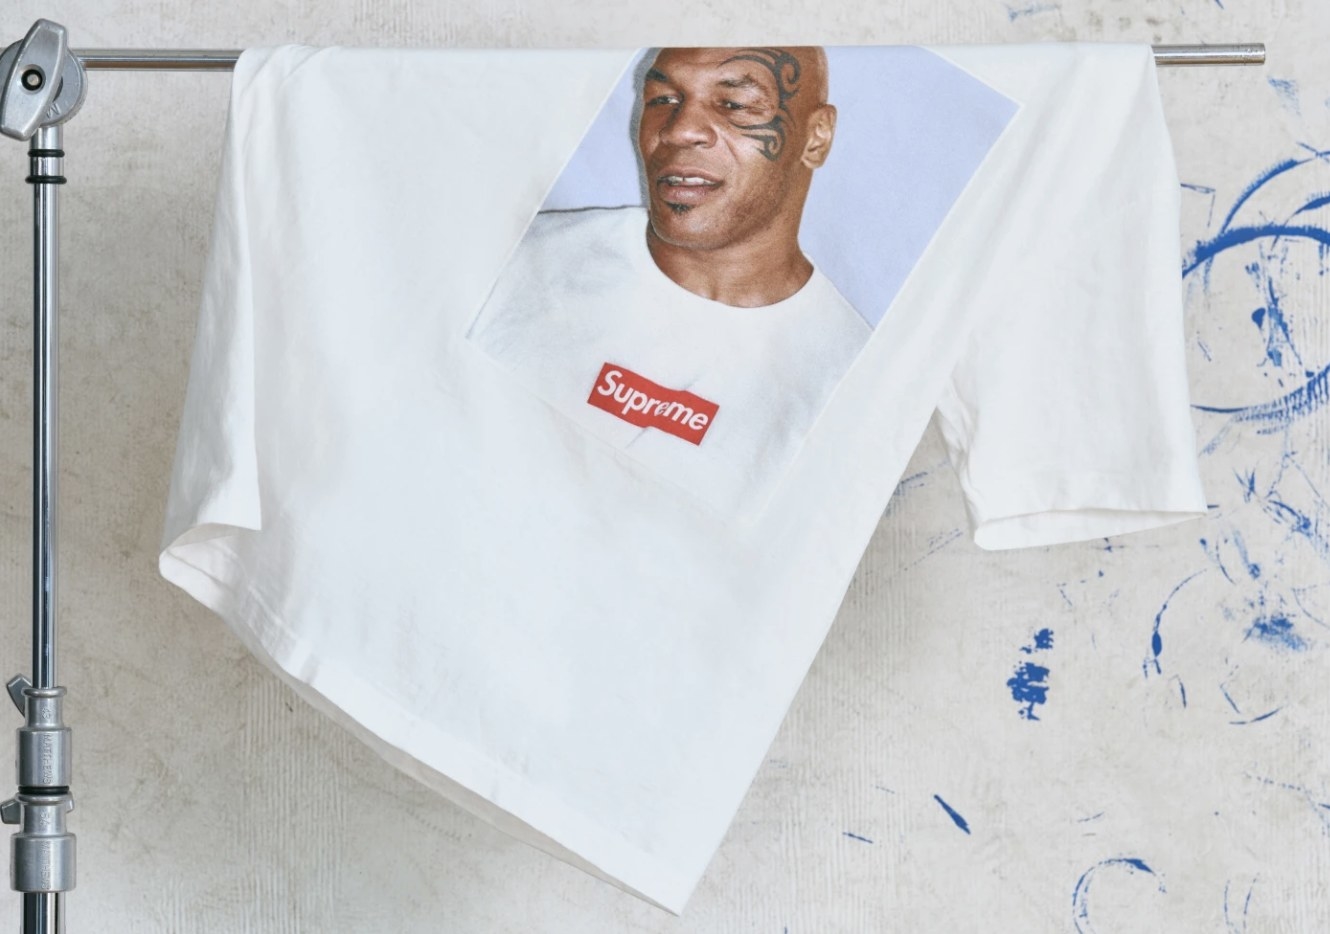 Mike Tyson Supreme T-shirt draped over a clothing rack